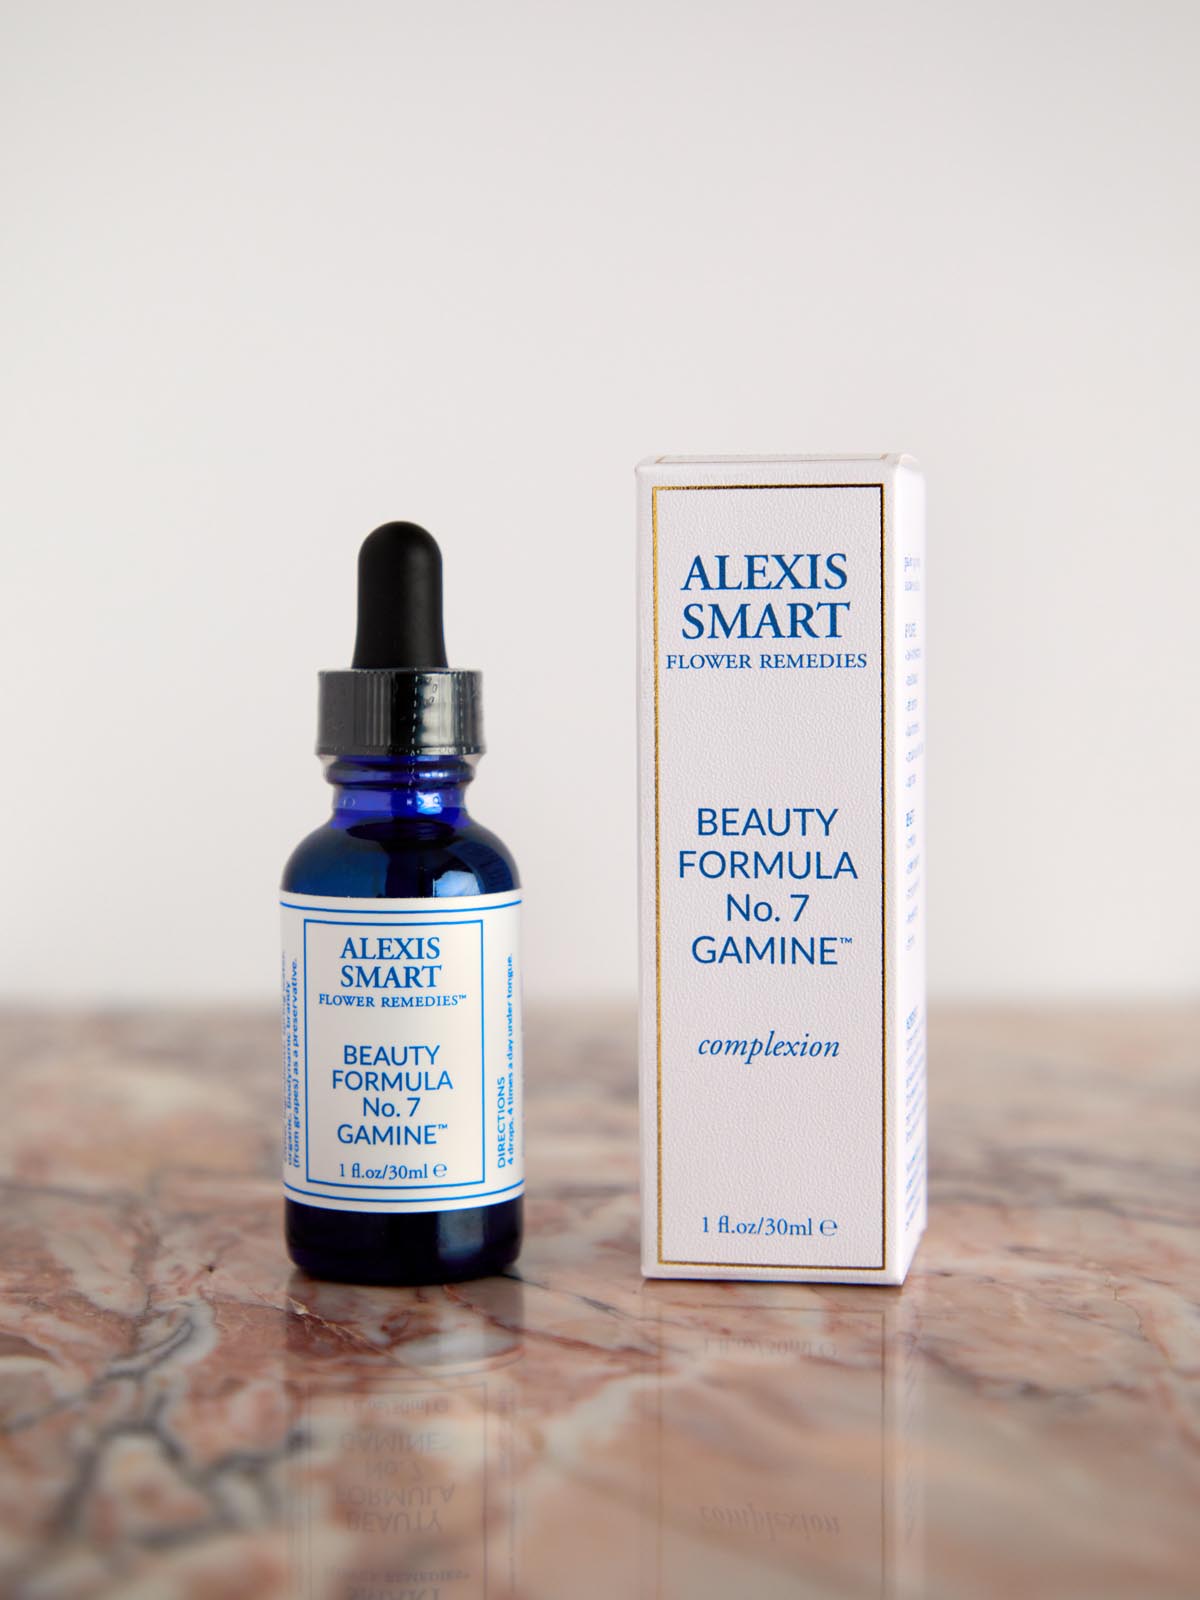 Beauty Formula No 7 Gamine with box on pink marble by Alexis Smart